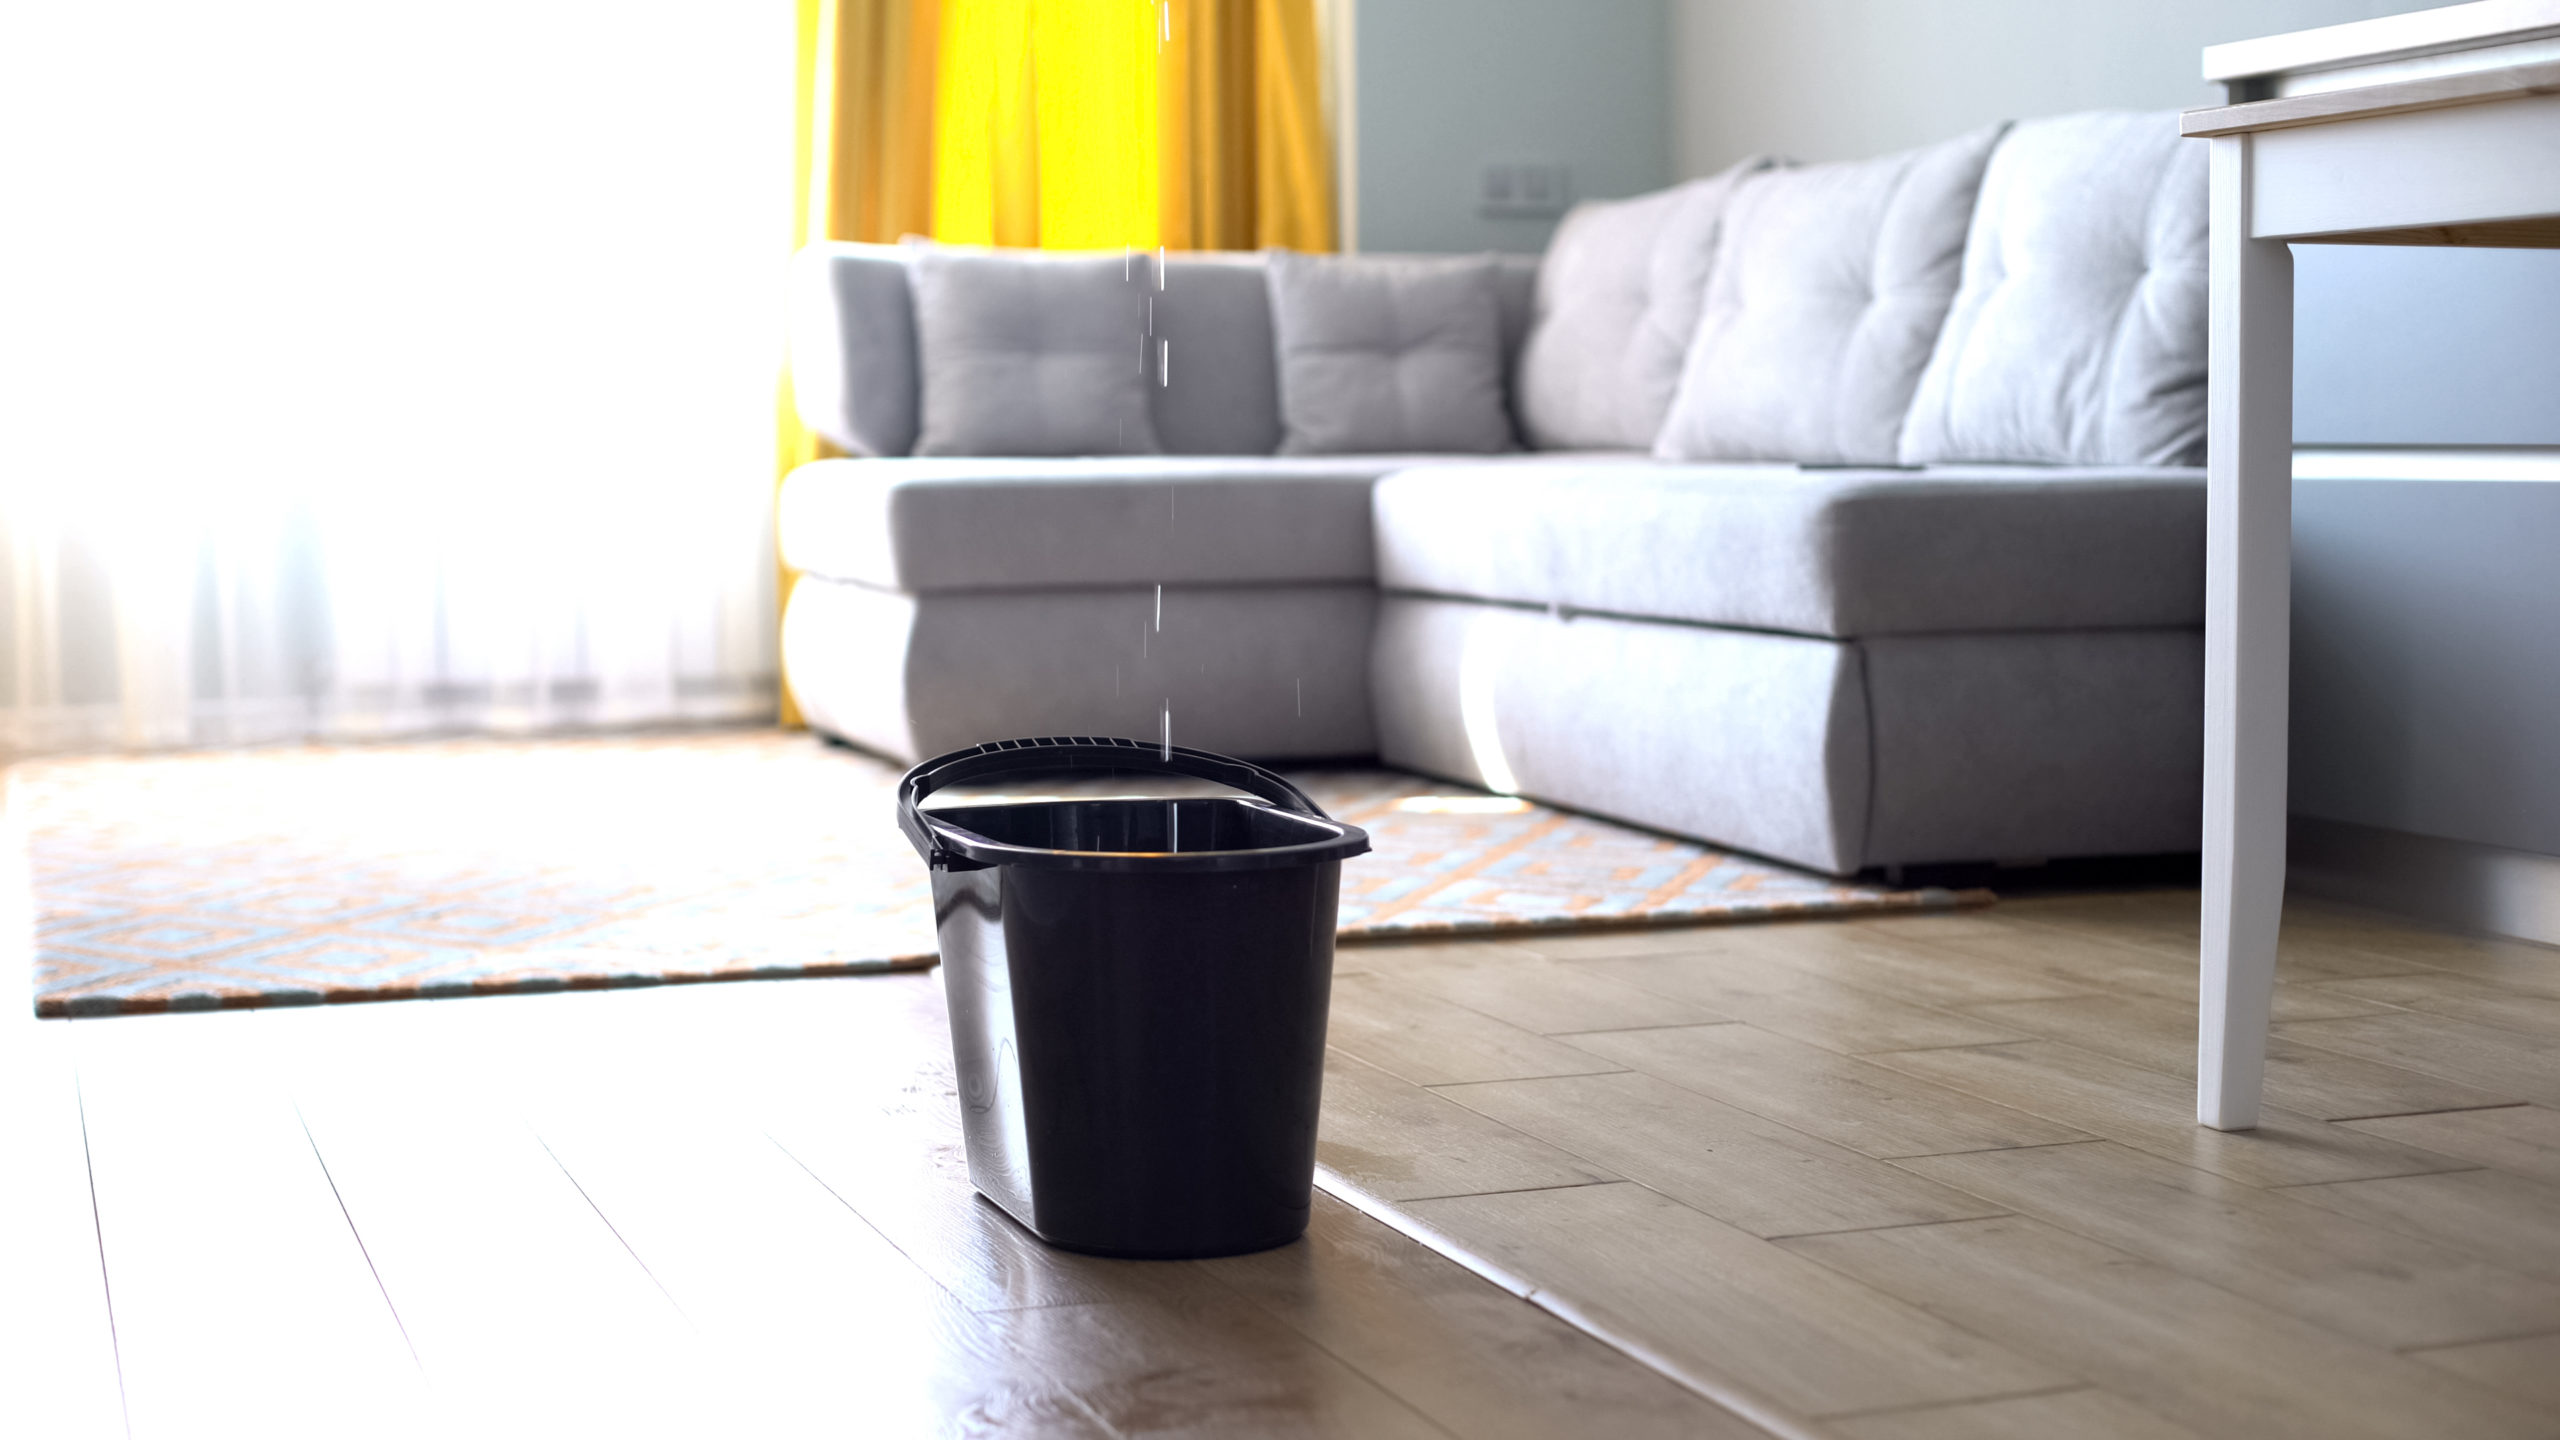 A bucket catches water leaking down from the ceiling and into the living room.